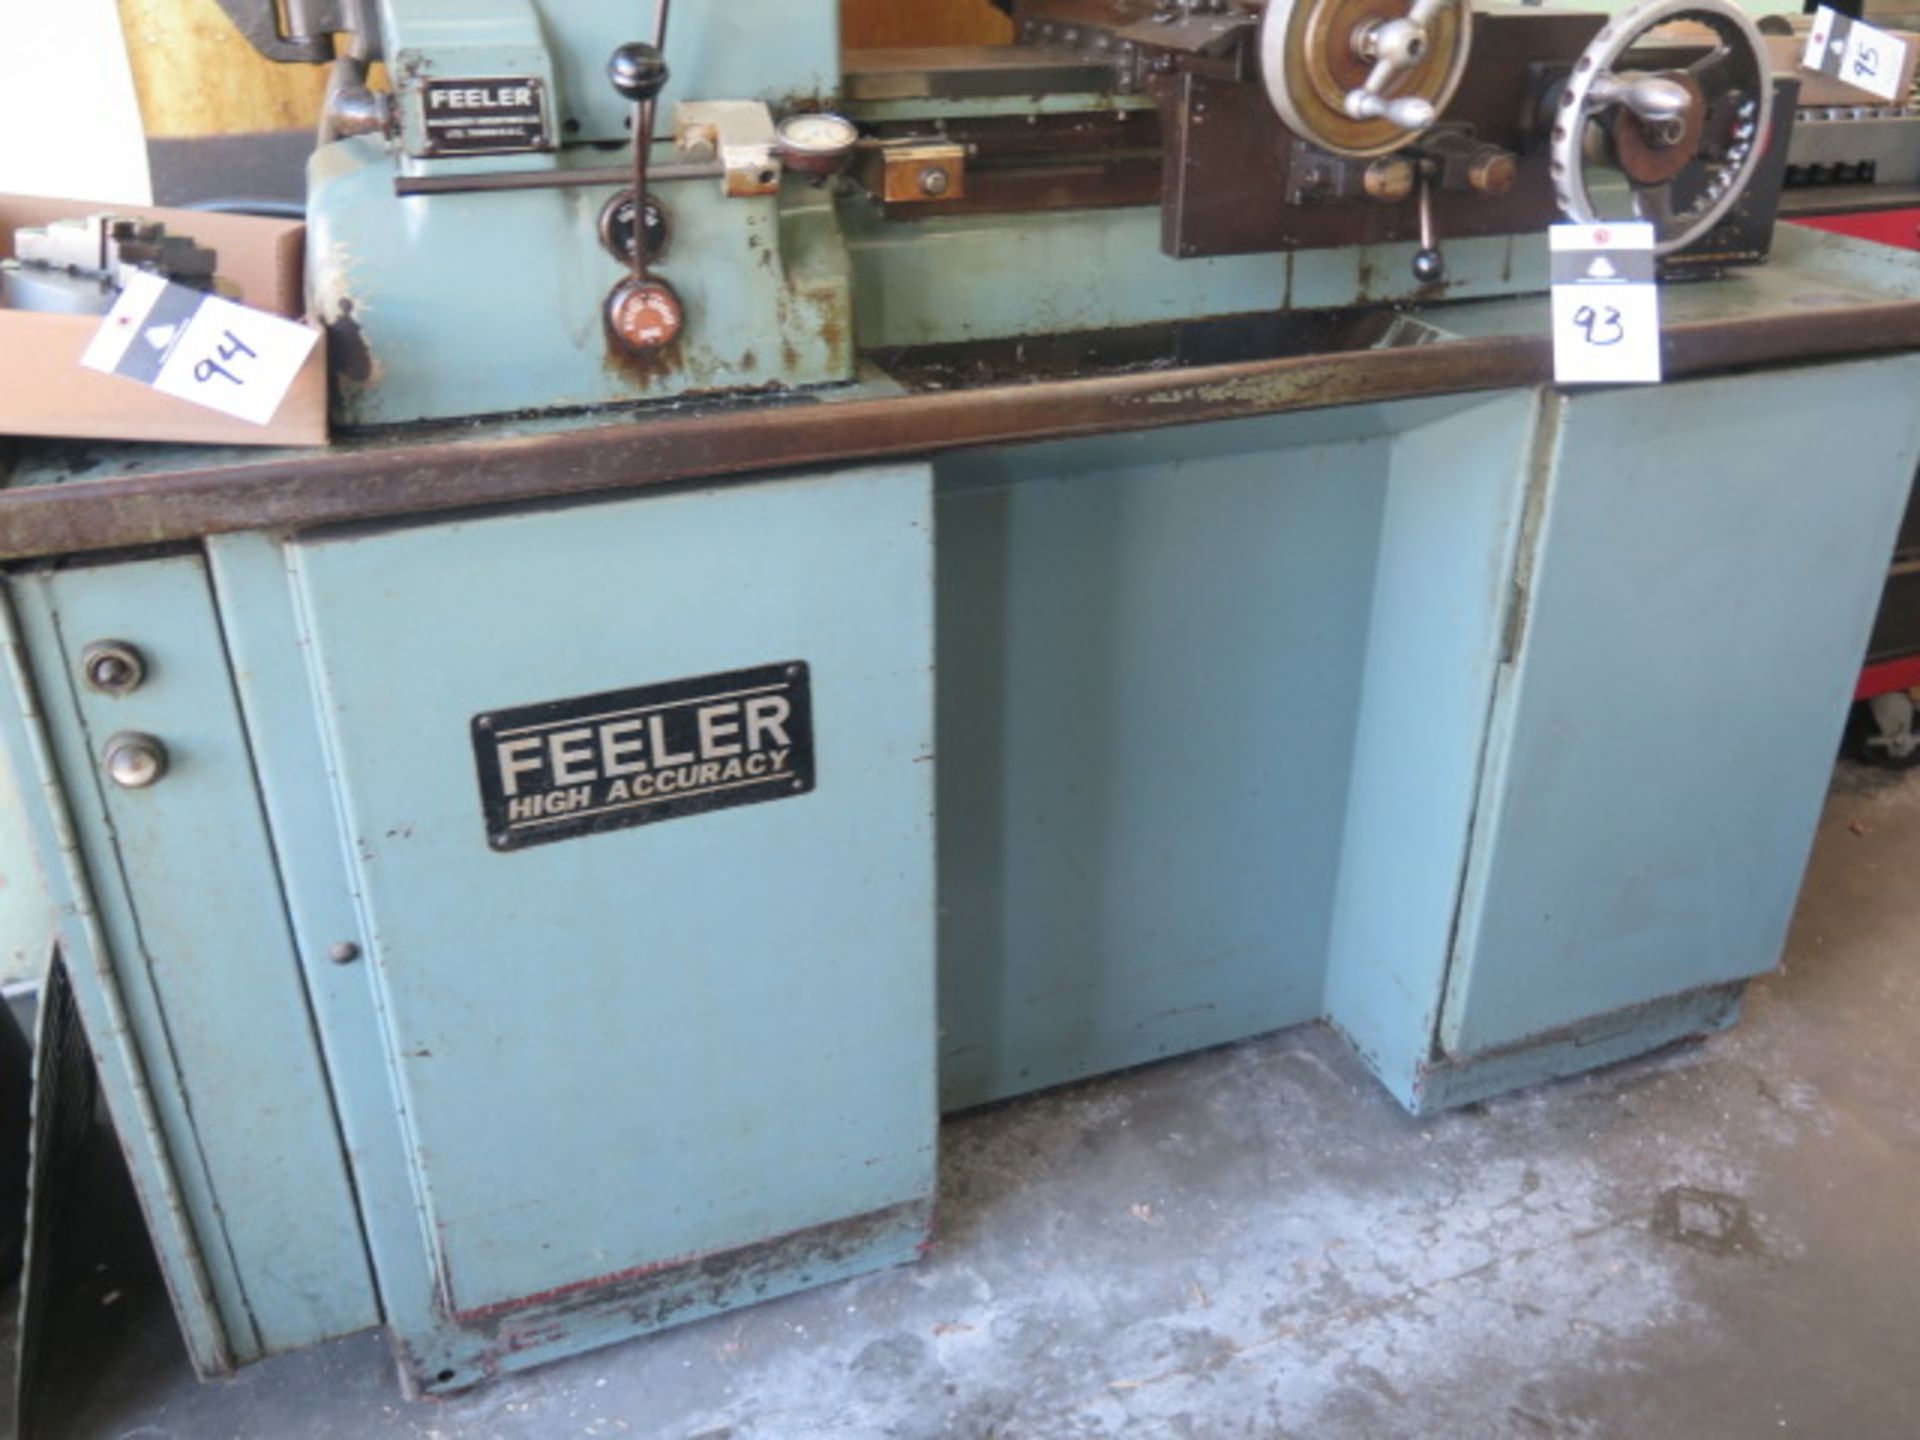 Feeler FHR-68 Hand Chucker s/n 72062 w/ 135-2955 RPM, 8-Station Turret, 5C Spindle, Power Feeds, - Image 4 of 10